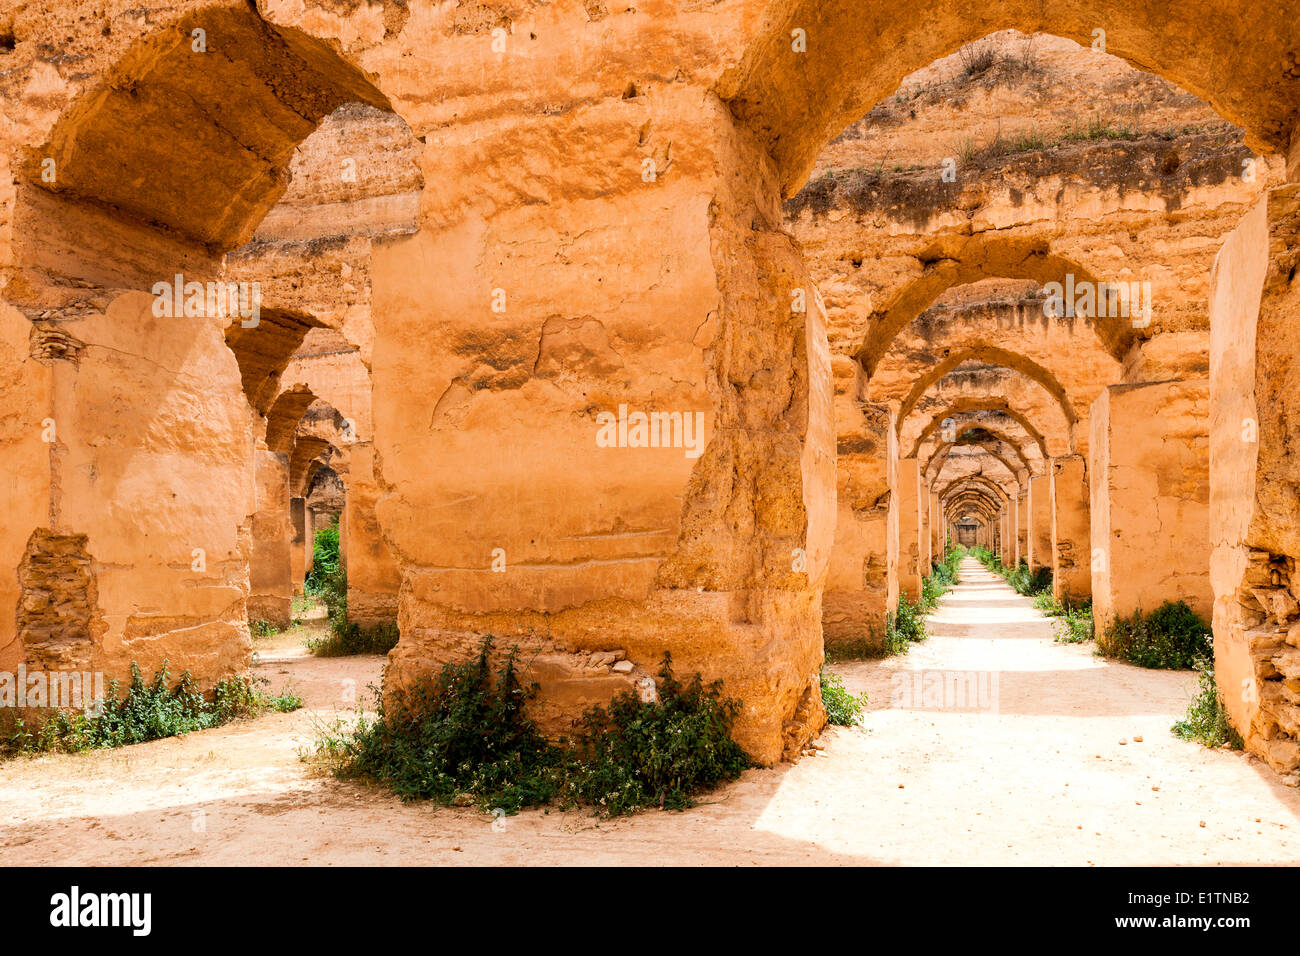 View of Heri es Souani, the Grainstore Stables in Meknes, Morocco. Stock Photo